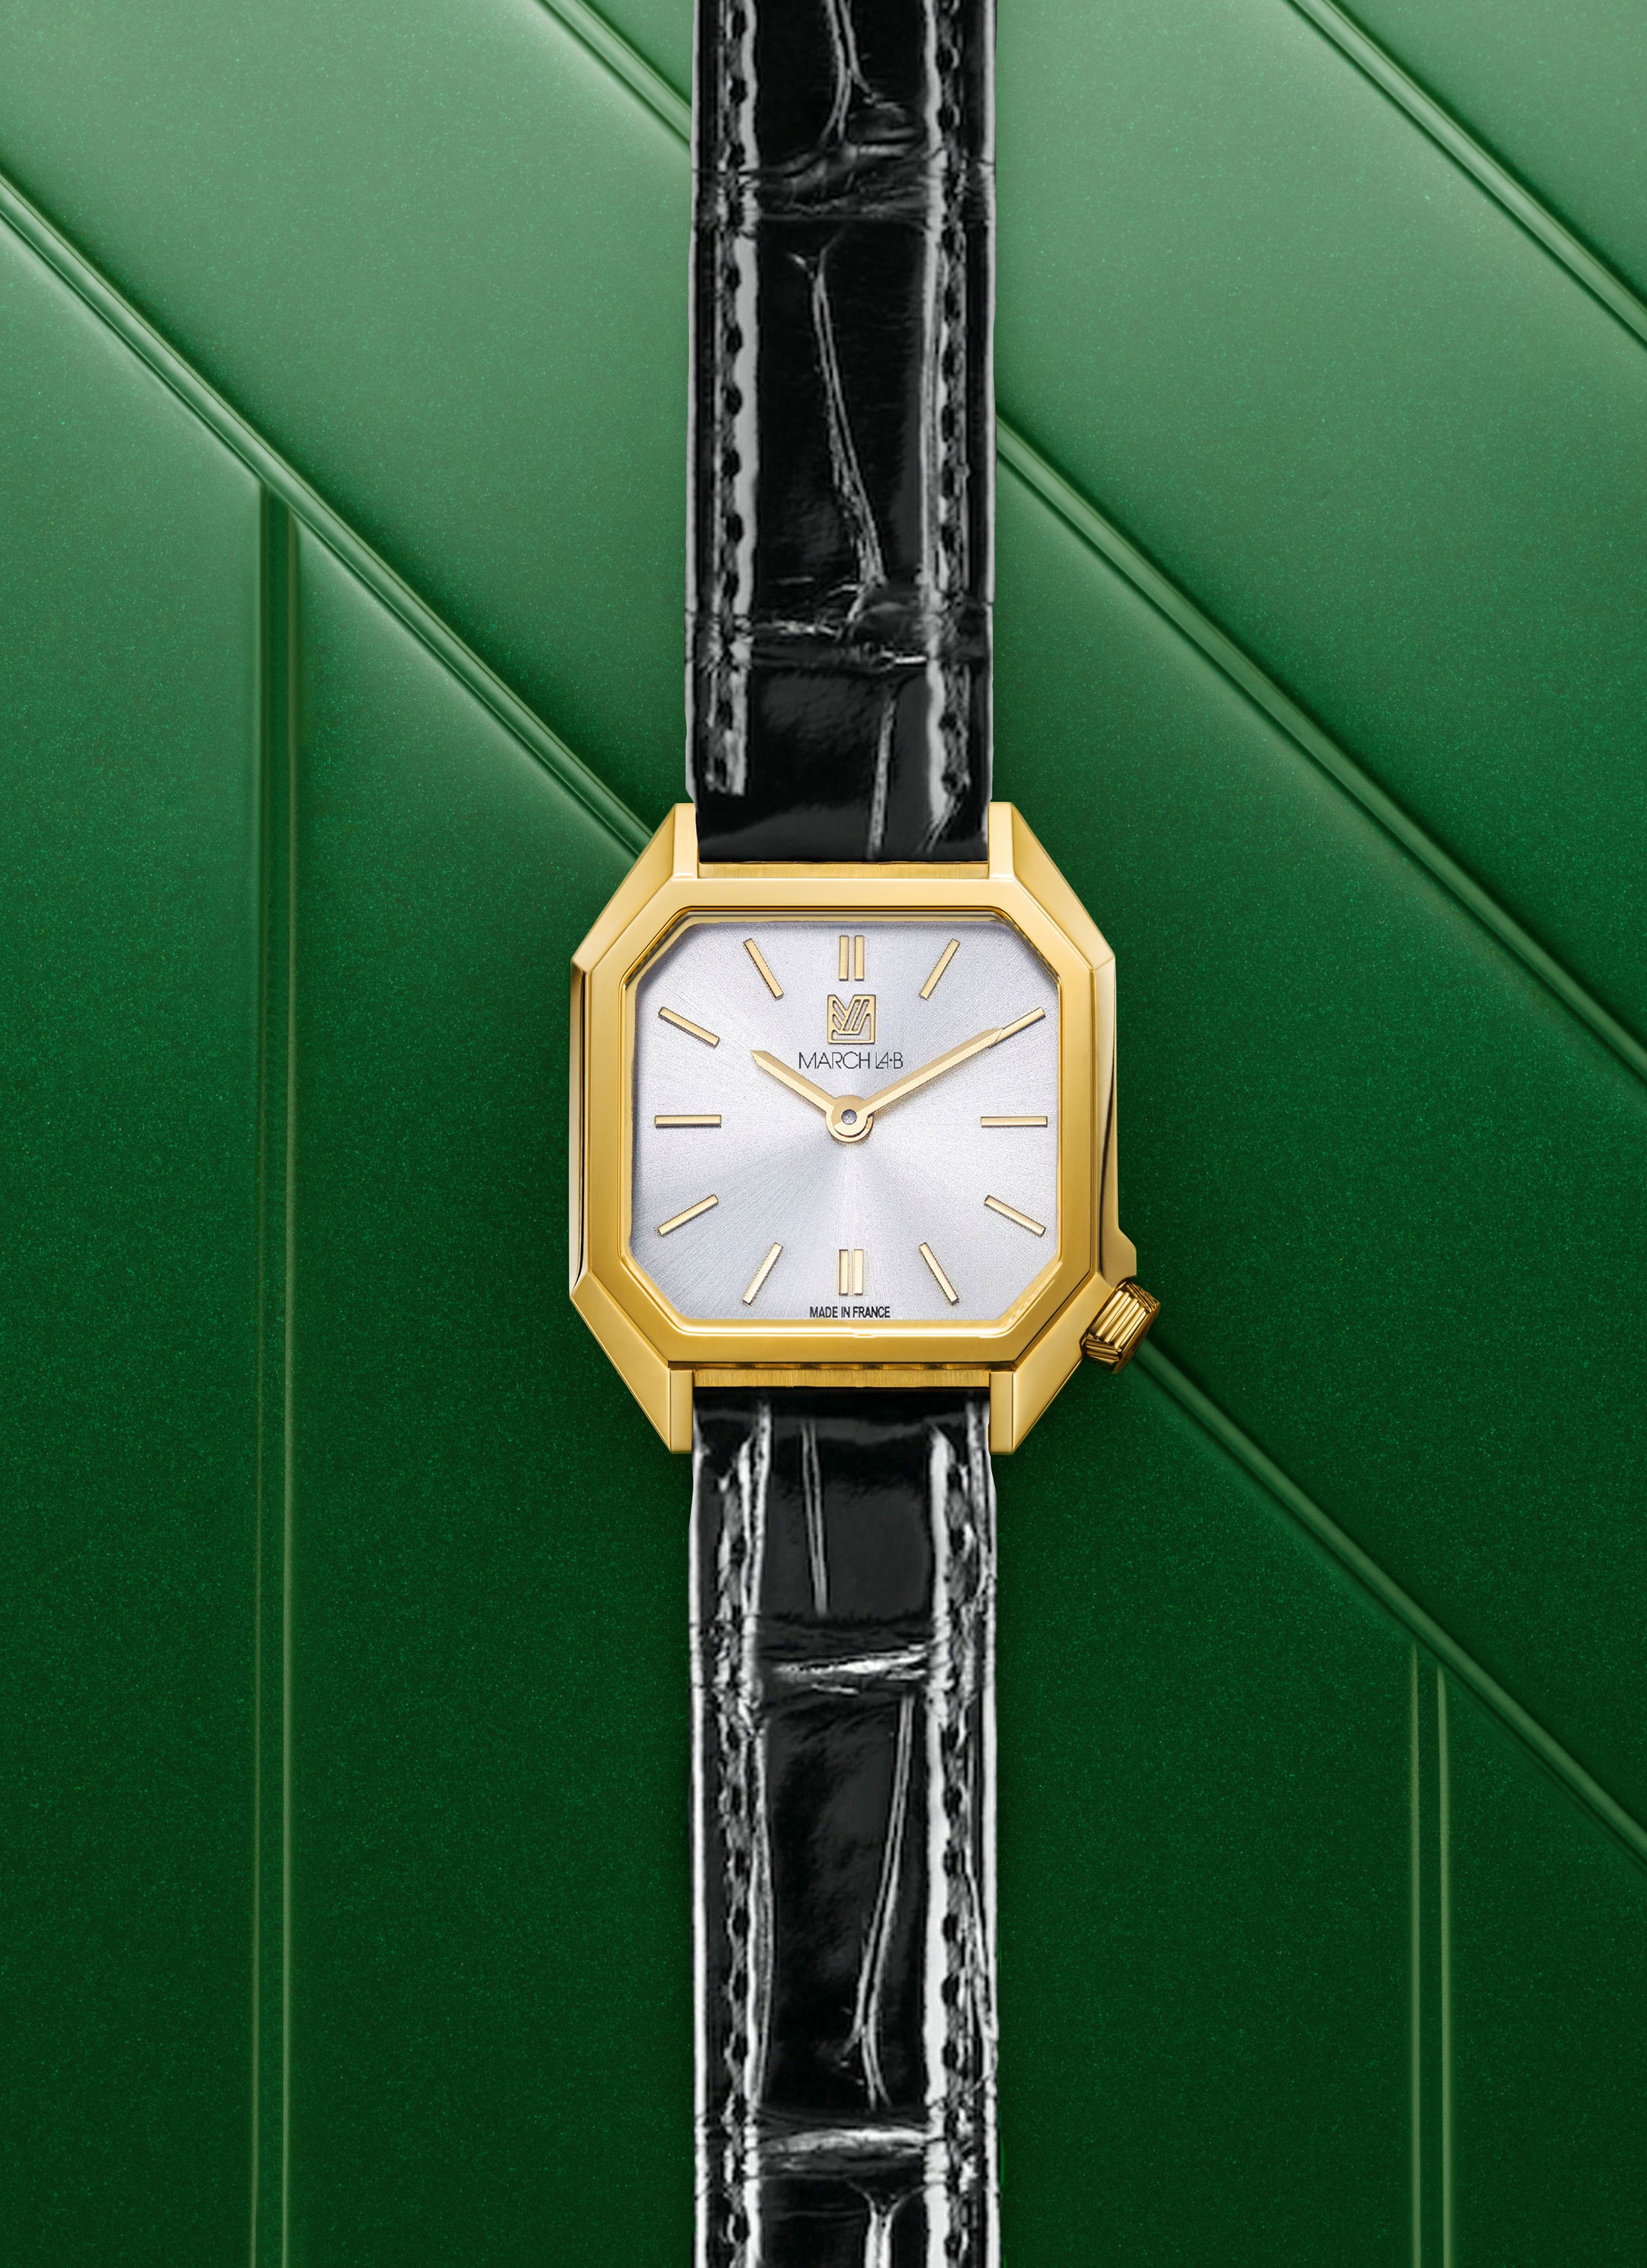 LADY MANSART ELECTRIC CONTINENTAL Watch